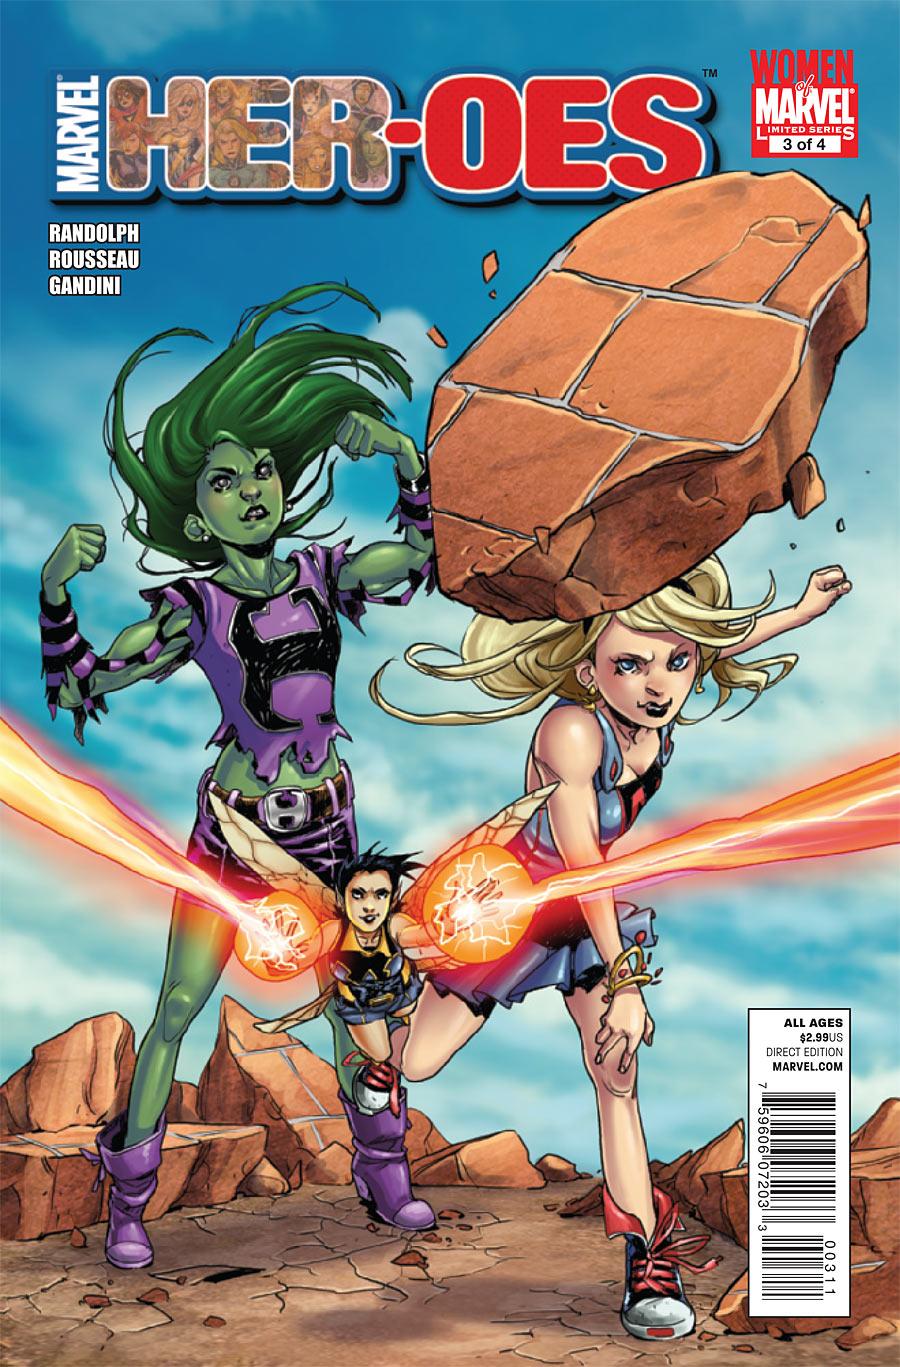 Marvel Her-oes Vol. 1 #3